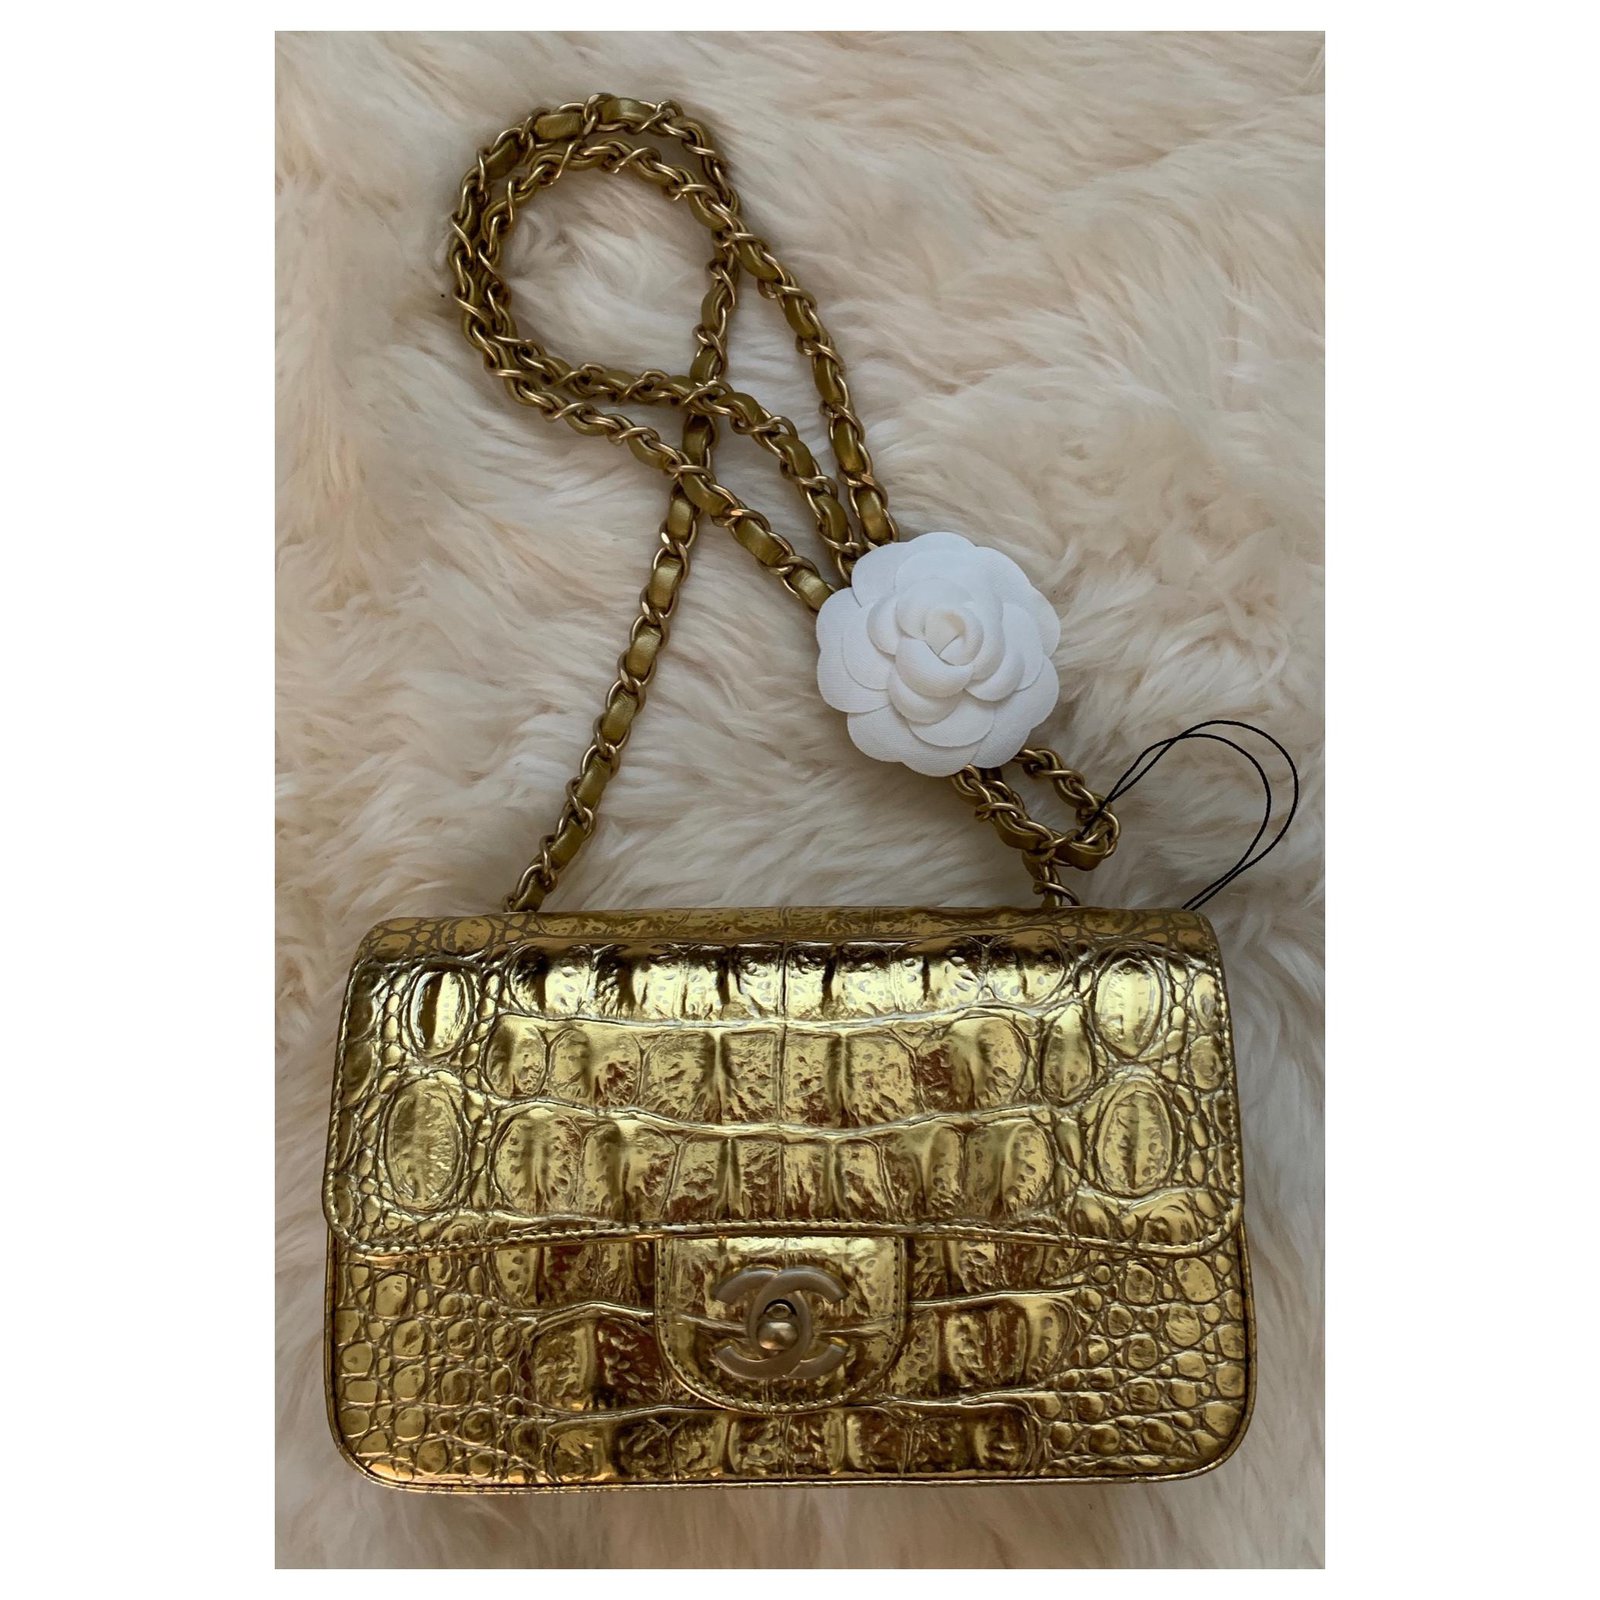 NIN CHANEL MINI FLAP TOP HANDLE CHANEL PLATE GOLD HARDWARE RARE SOLD OUT